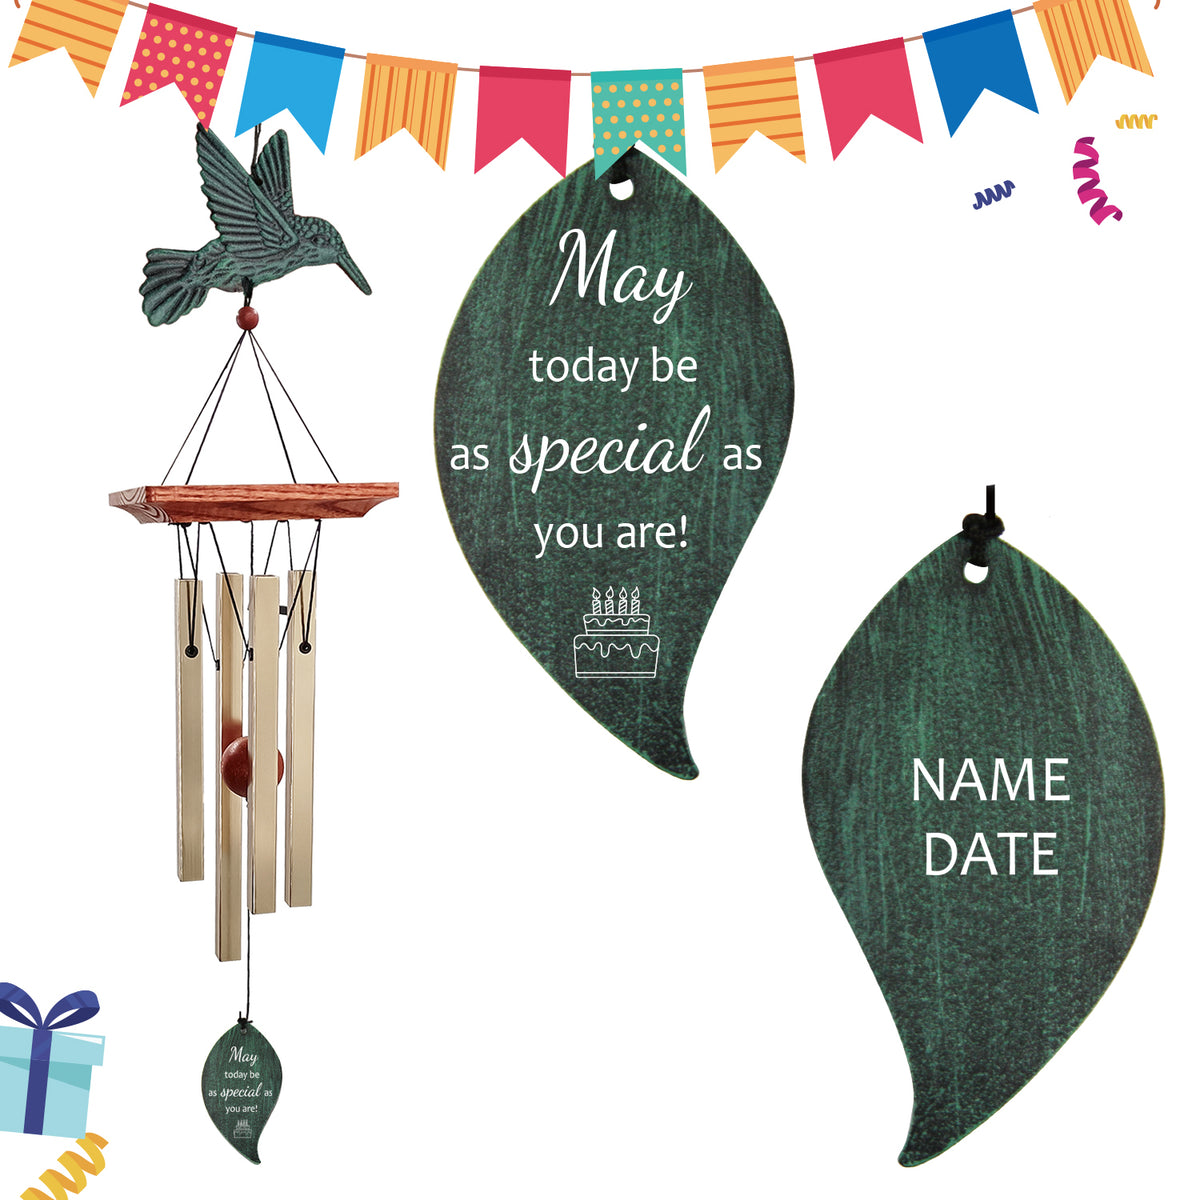 Personalized Birthday Gift Wind Chimes-25 Inch, 4 Tubes Ecology Series